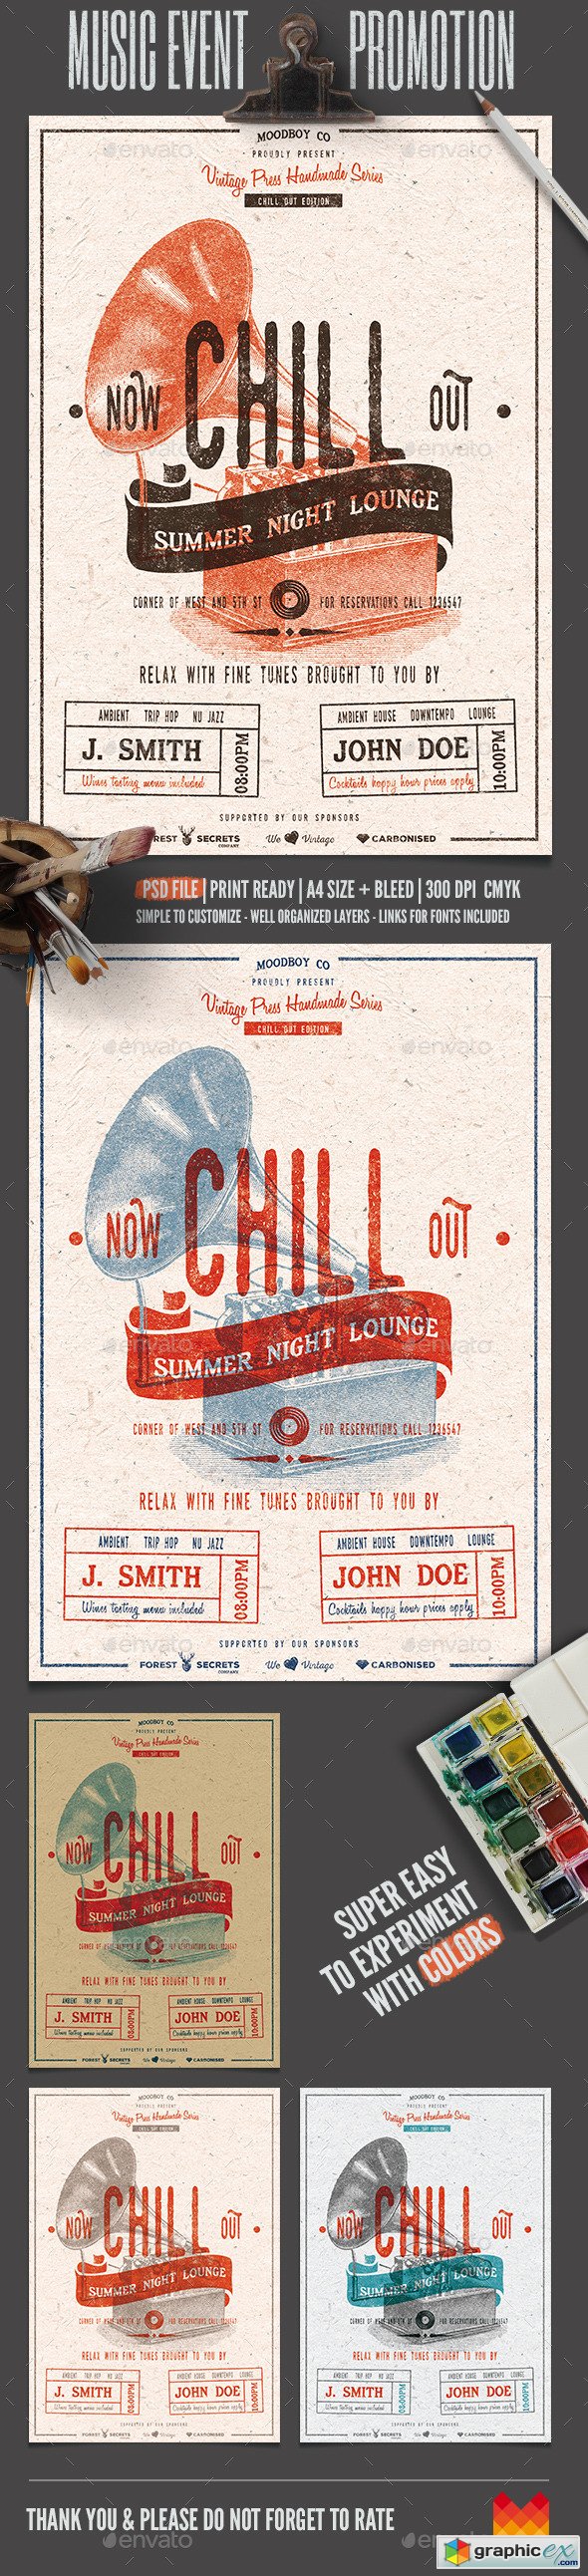 Chill Out - Lounge Flyer/Poster